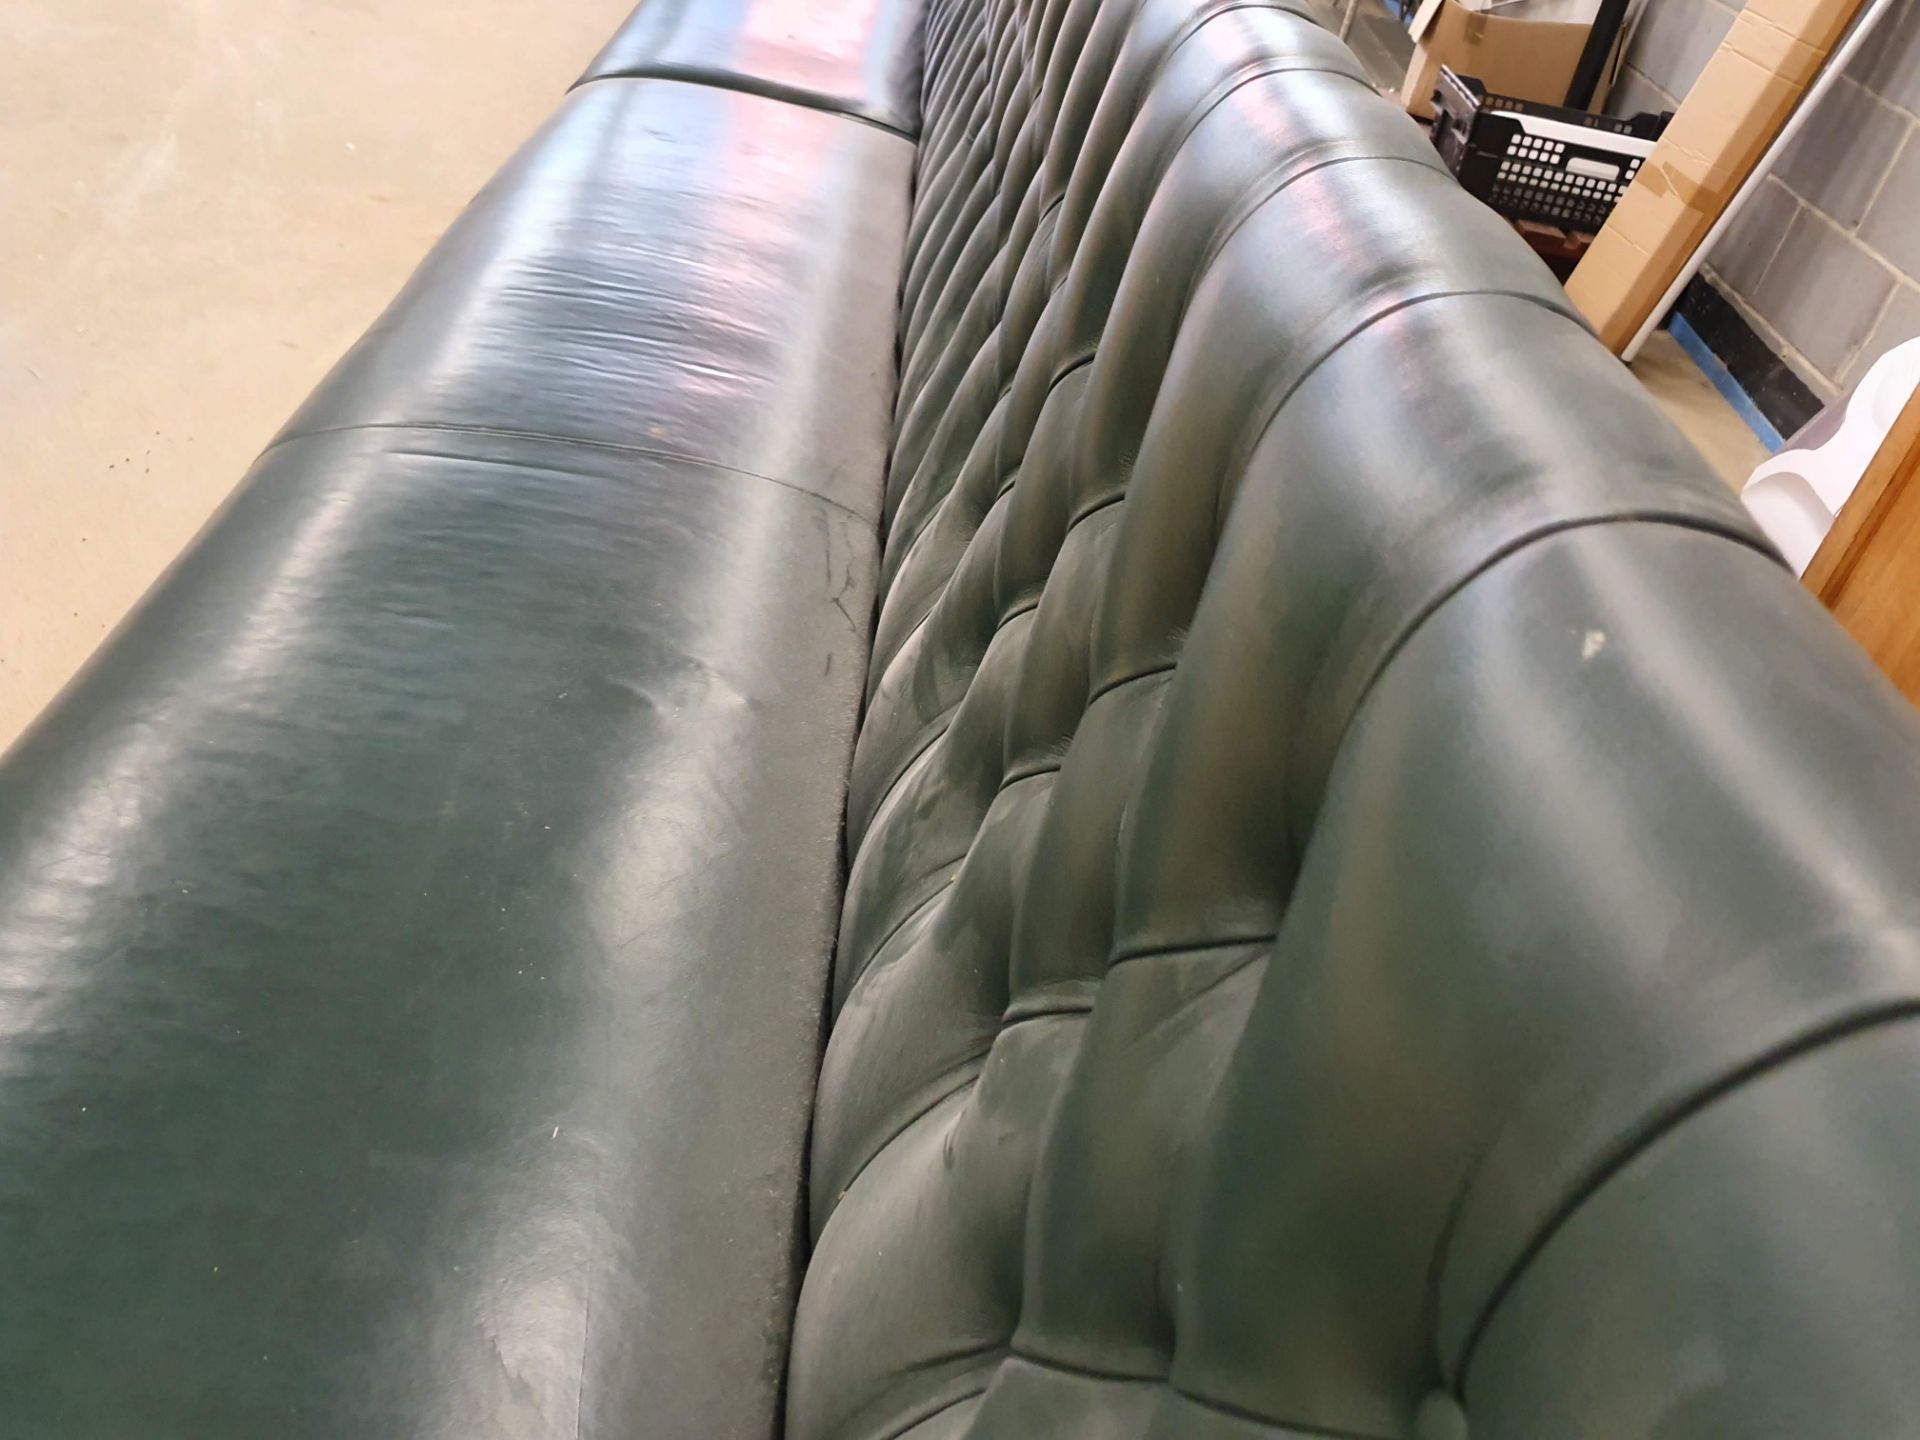 1 x Restaurant Seating Bench Upholstery in Green With Studded Back and Oak Turned Legs - H91 - Image 10 of 10